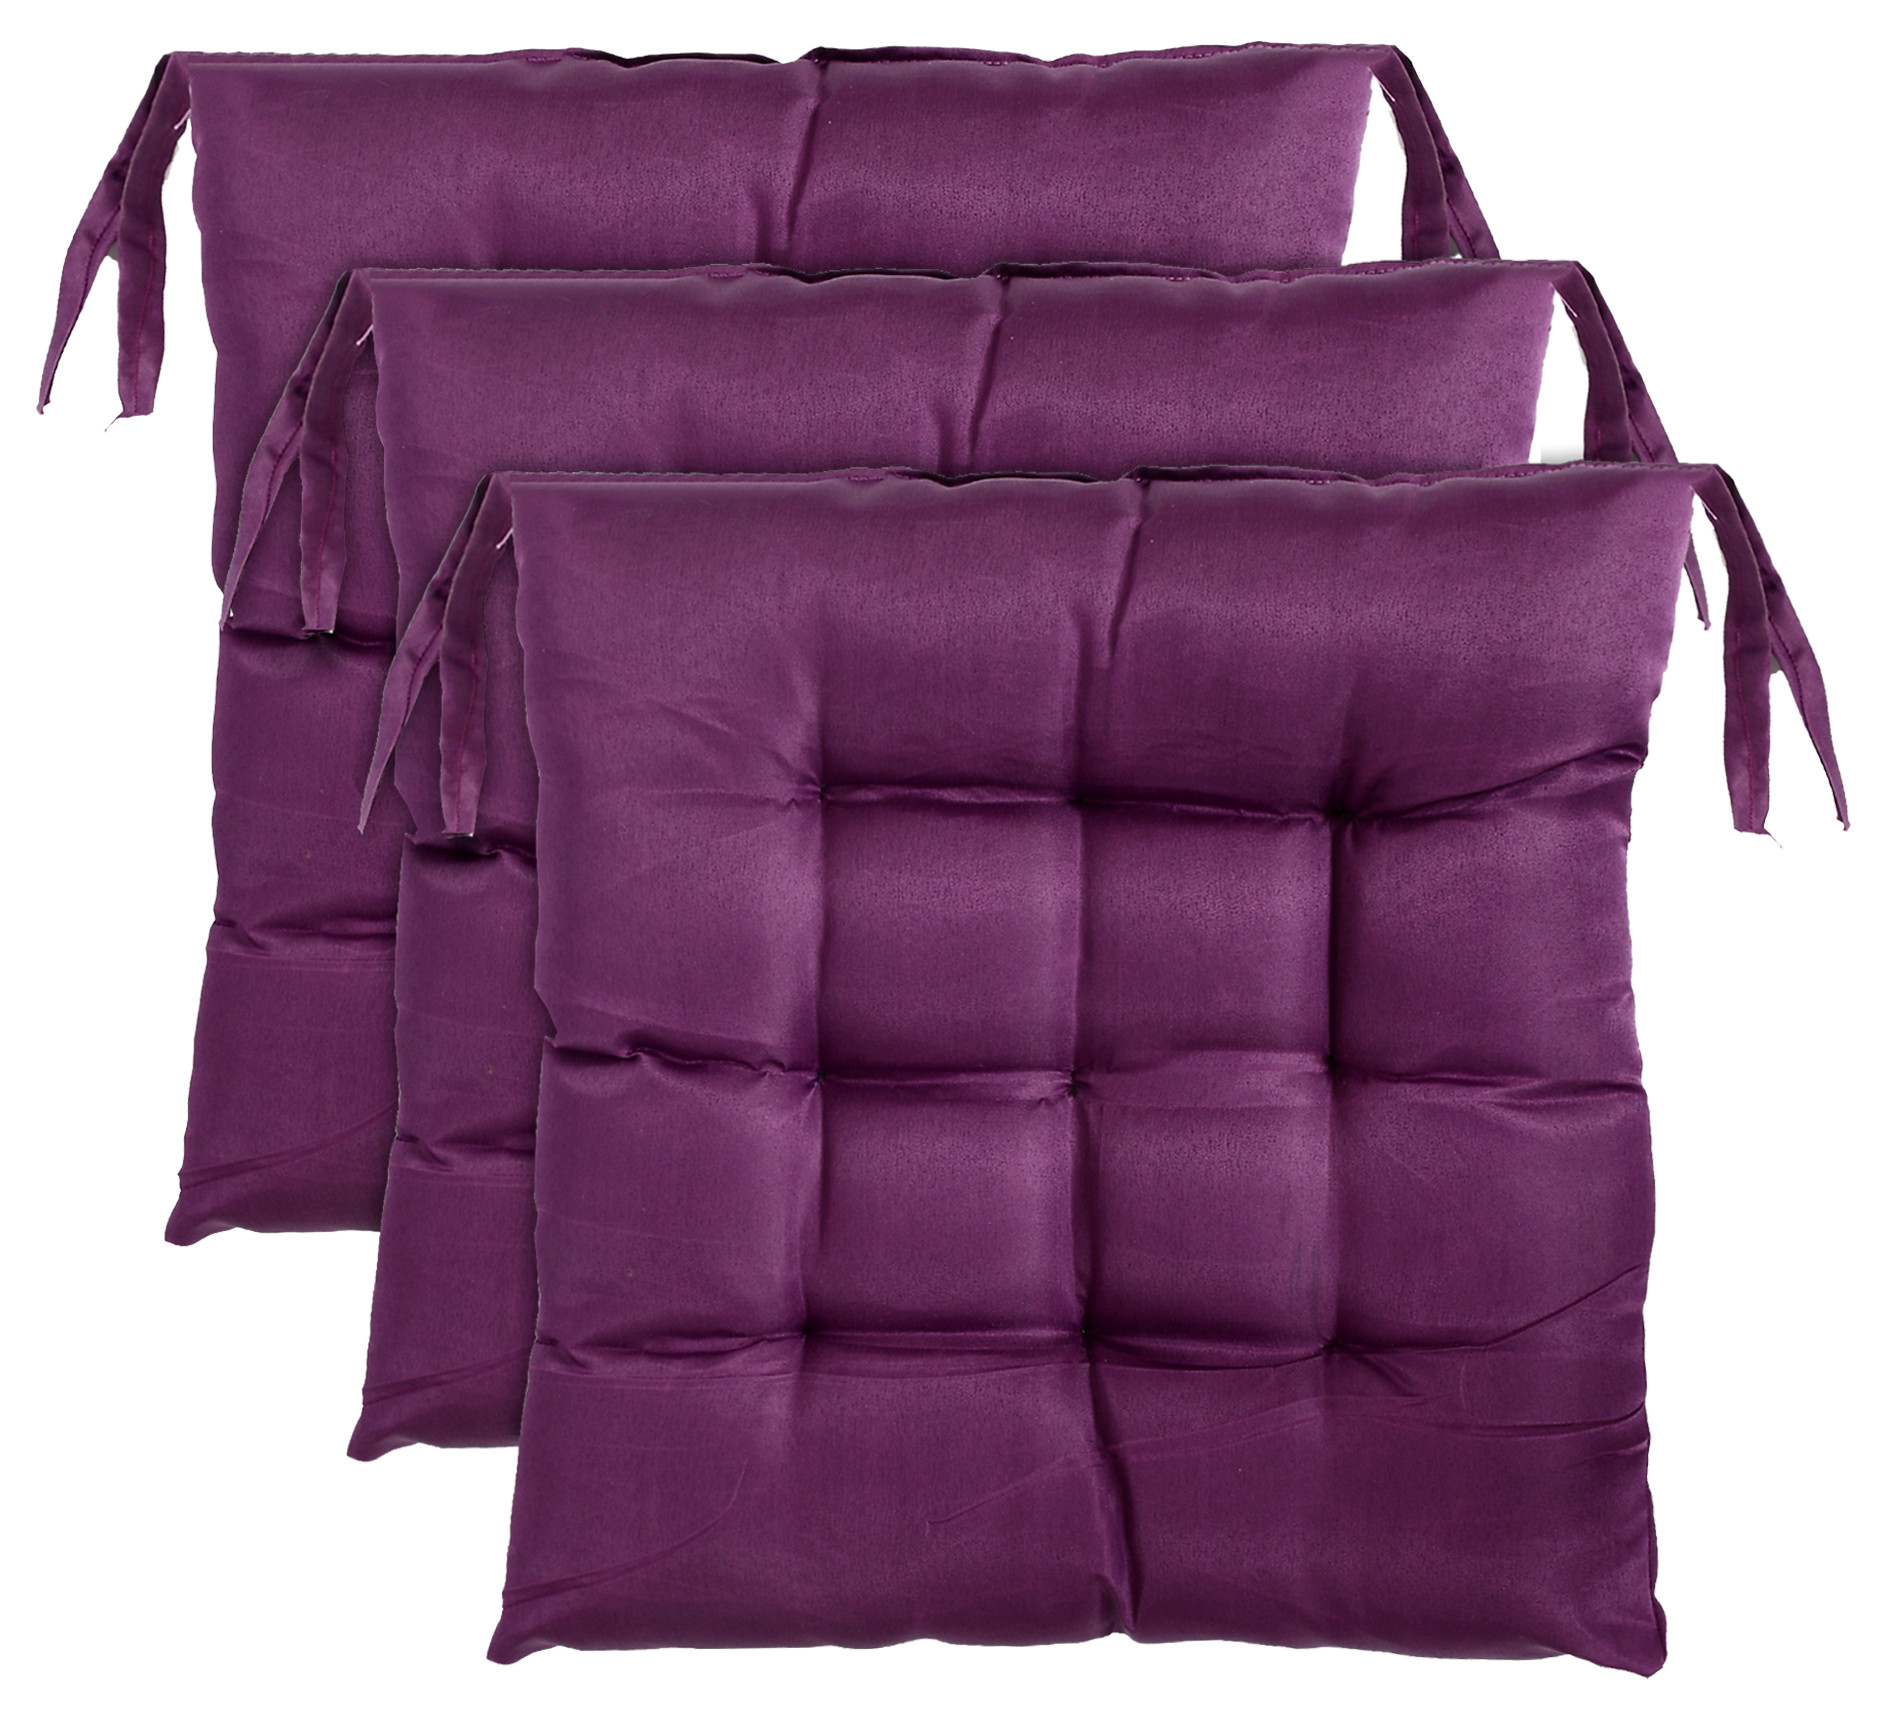 Kuber Industries Microfiber Square Chair Pad Seat Cushion For Car Pad, Office Chair, Indoor/Outdoor, Dining Living Room, Kitchen With Ties, 18*18 Inch (Purple)